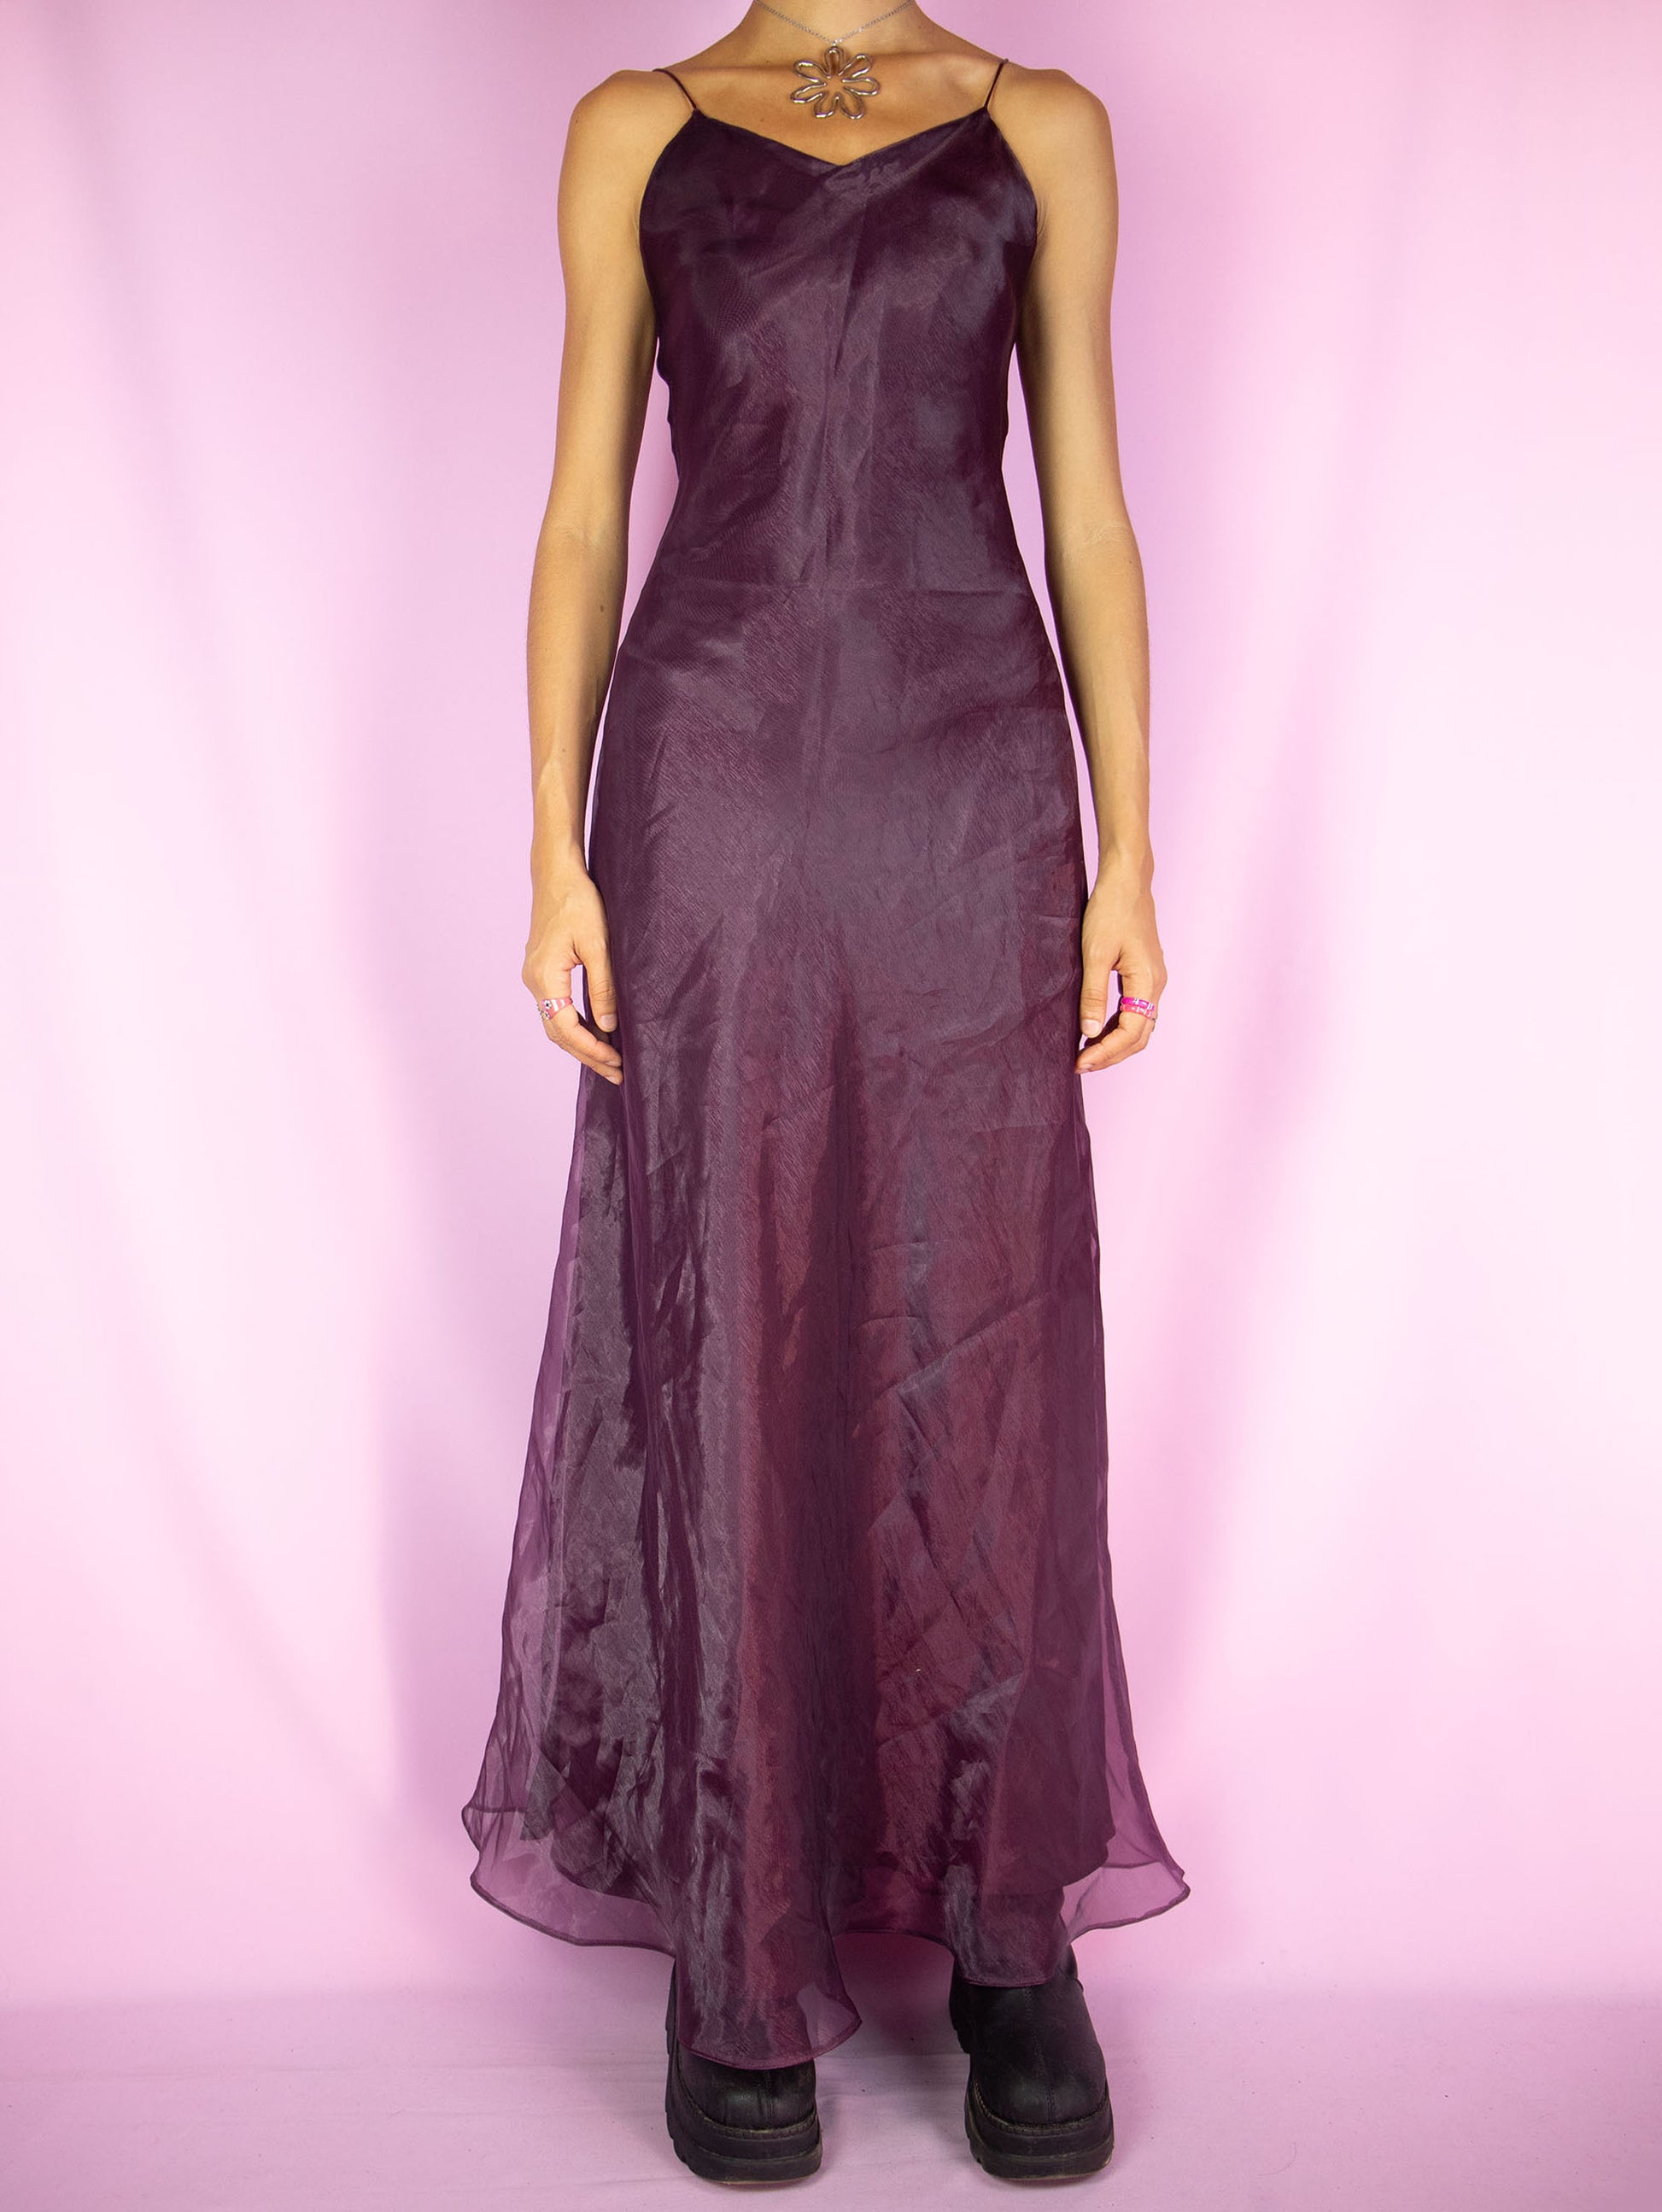 The Vintage 90s Dark Purple Maxi Dress is a purple sleeveless flared dress with spaghetti straps. Fairy grunge whimsygoth 1990s summer party night midi dress.